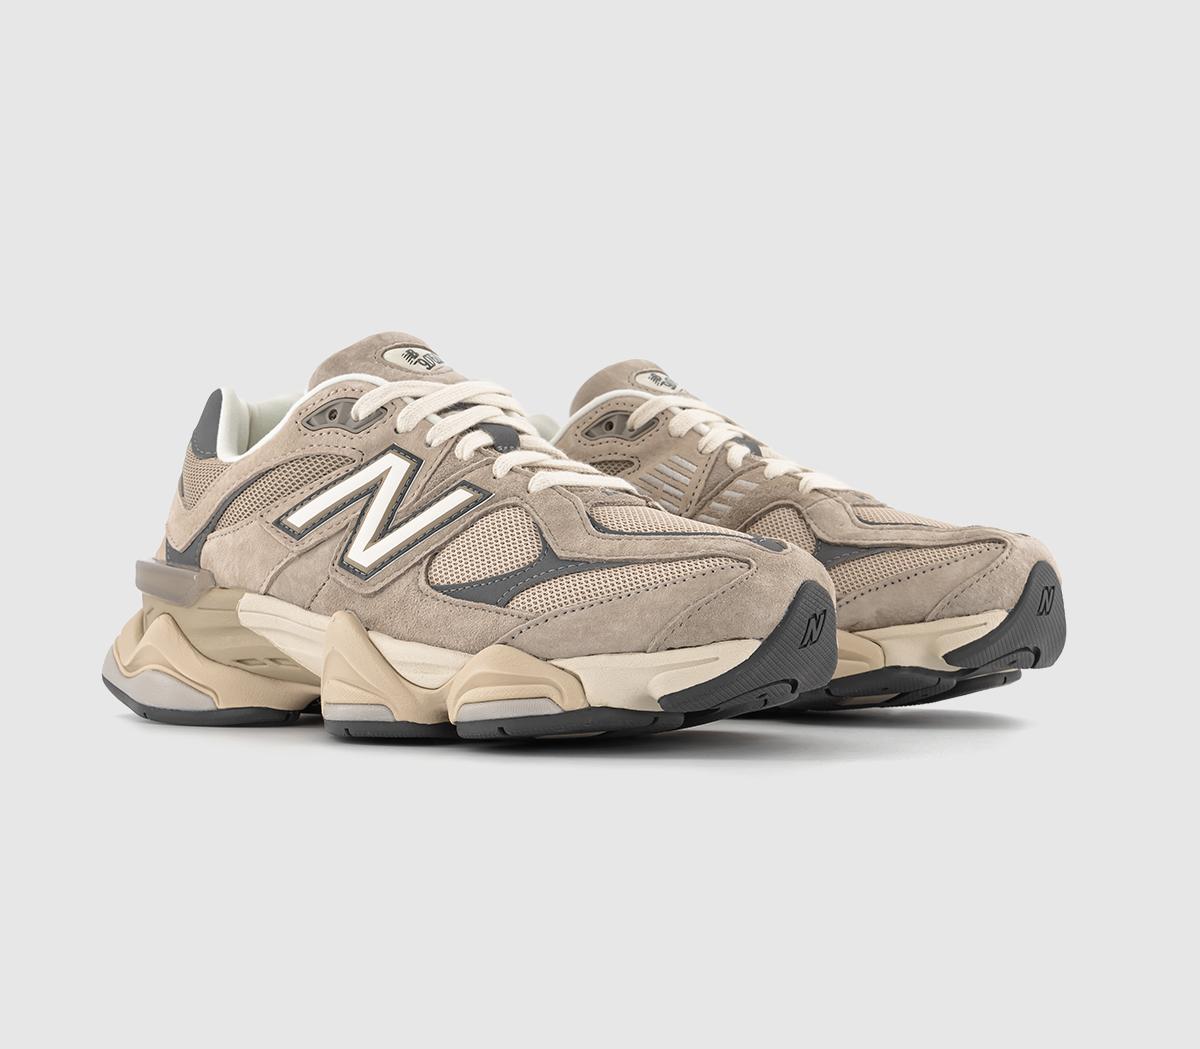 New Balance 9060 Trainers Stonewall Grey - Men's Trainers